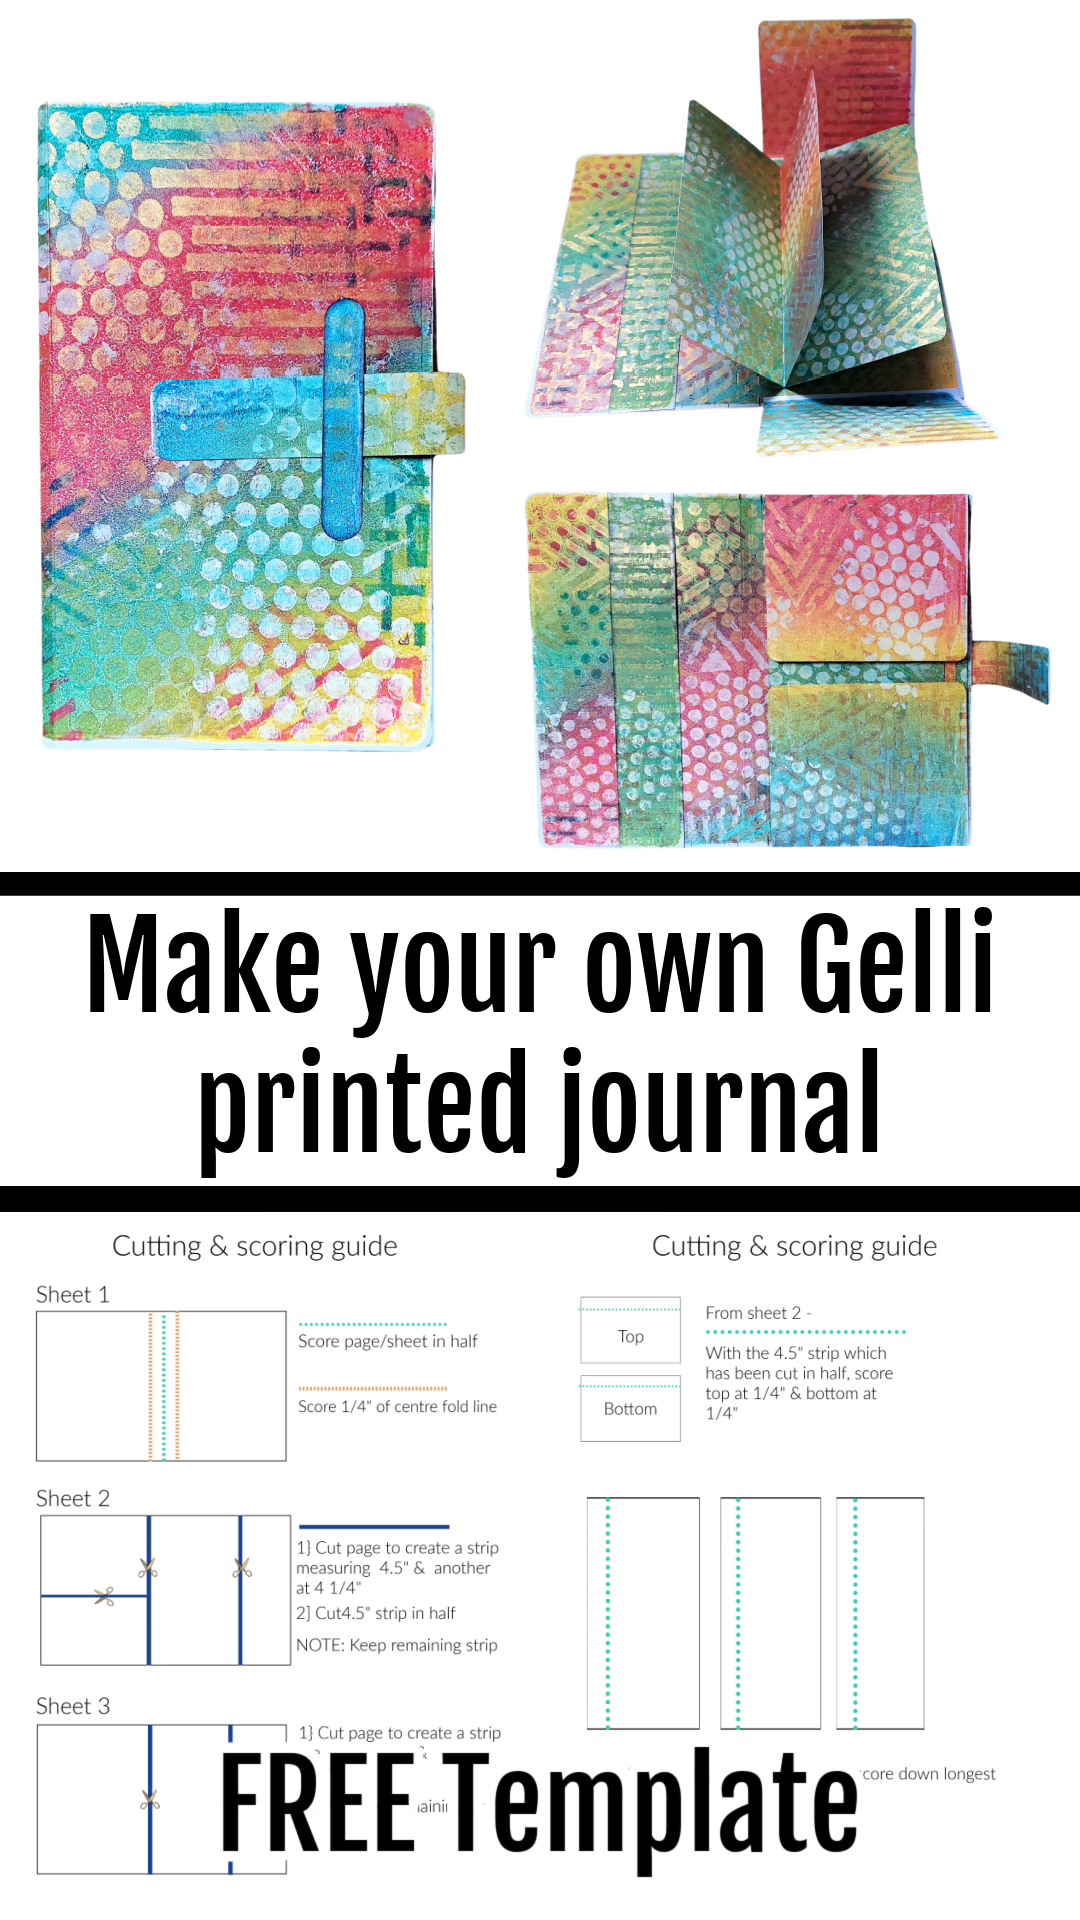 Basic Gelli Plate Printing Art Lesson for beginners - Art With